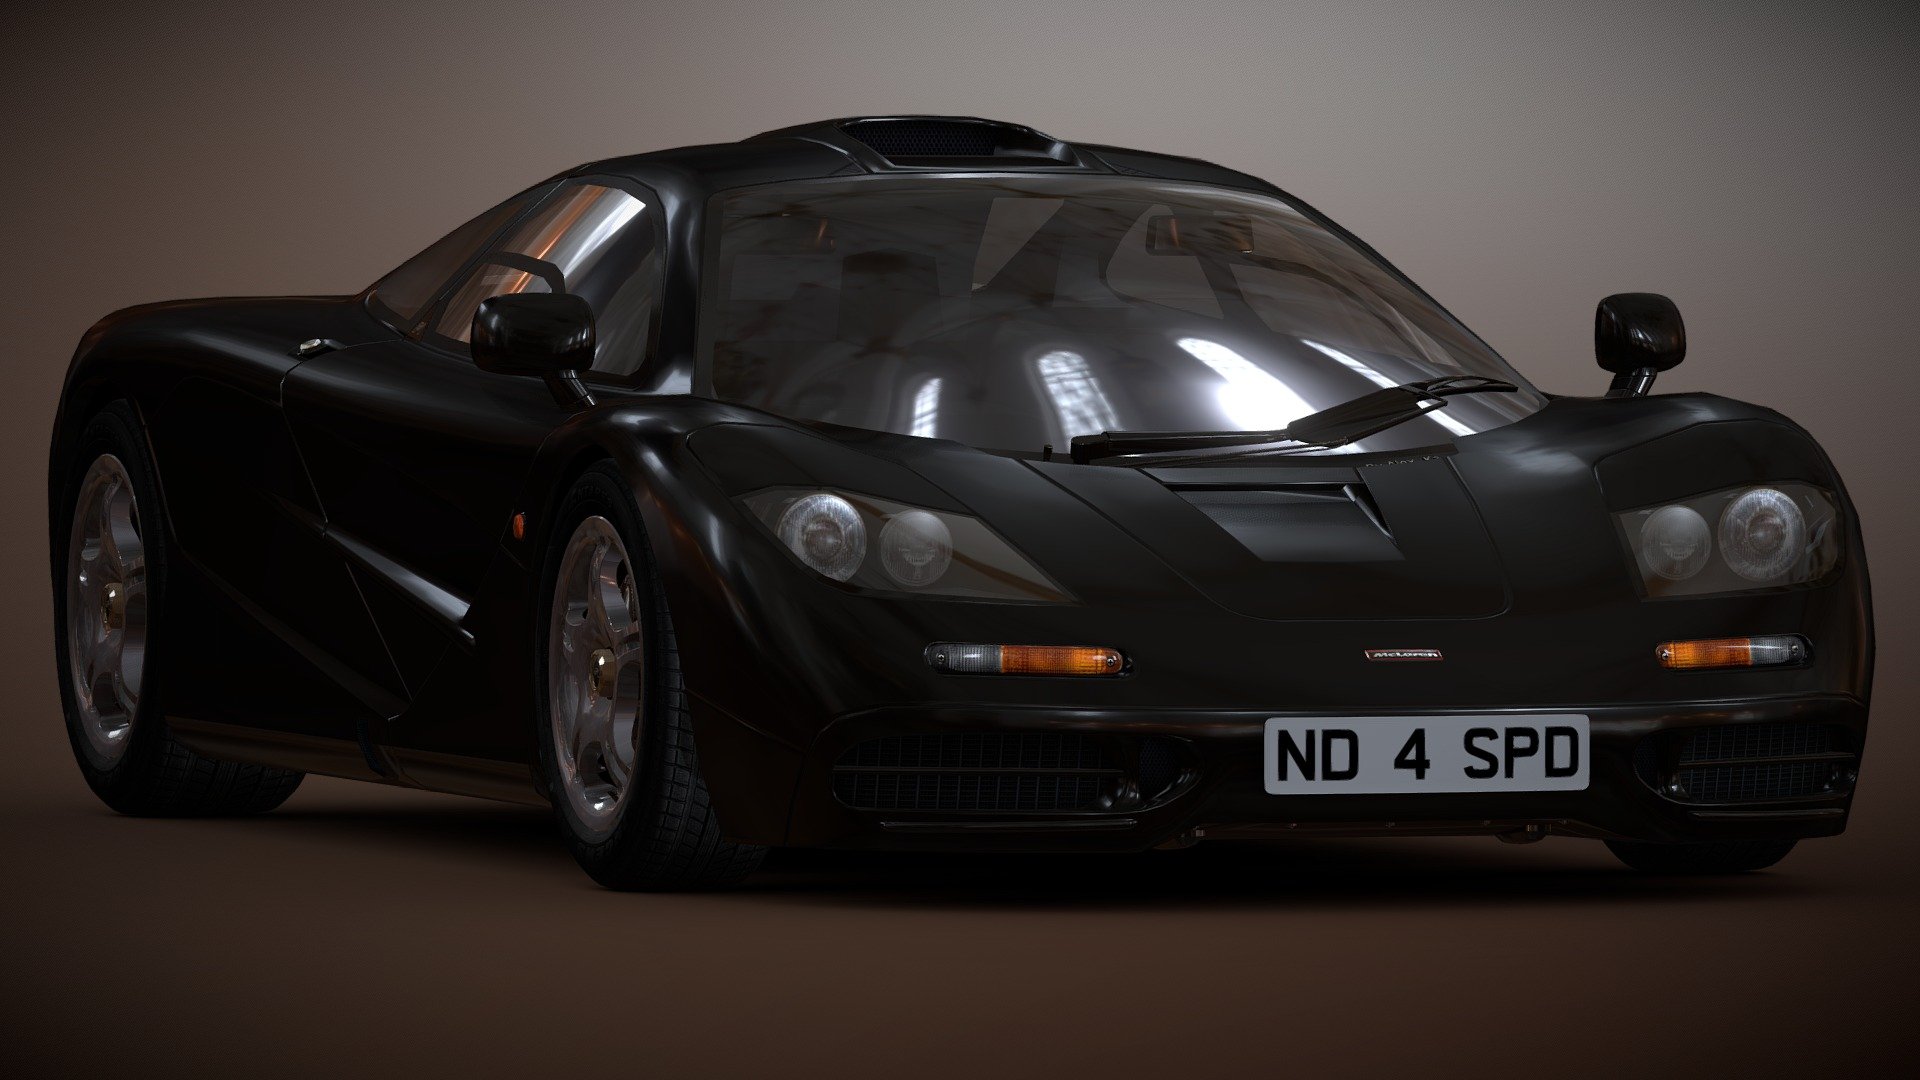 I'm a fan of cars from NFS, NFS2, NFS3: hot pursuit.

I like to create accurate replicas of the cars from these games.

And i styled this McLaren F1 according to the NFS2 version.

For work, i used a mid-poly model, for the possibility of easy use for games,

but replaced all the small details of the exterior with HD details in order to achieve quality and good appearance.

I created an exact (ND 4 SPD) license plate,

some textures and quality wheels.

Just as in all my cars, i always create the correct reflecting geometry of mirrors,

and the wheels will never hang in the void  (like many 3D models and cars from games),

because i really love the cars vhich i make.

And i'm glad to share that with you,

if you value real quality, attention to details and a rational approach to work.



 - McLaren F1 1993 NFS2 Edition By Alex.Ka 3d model